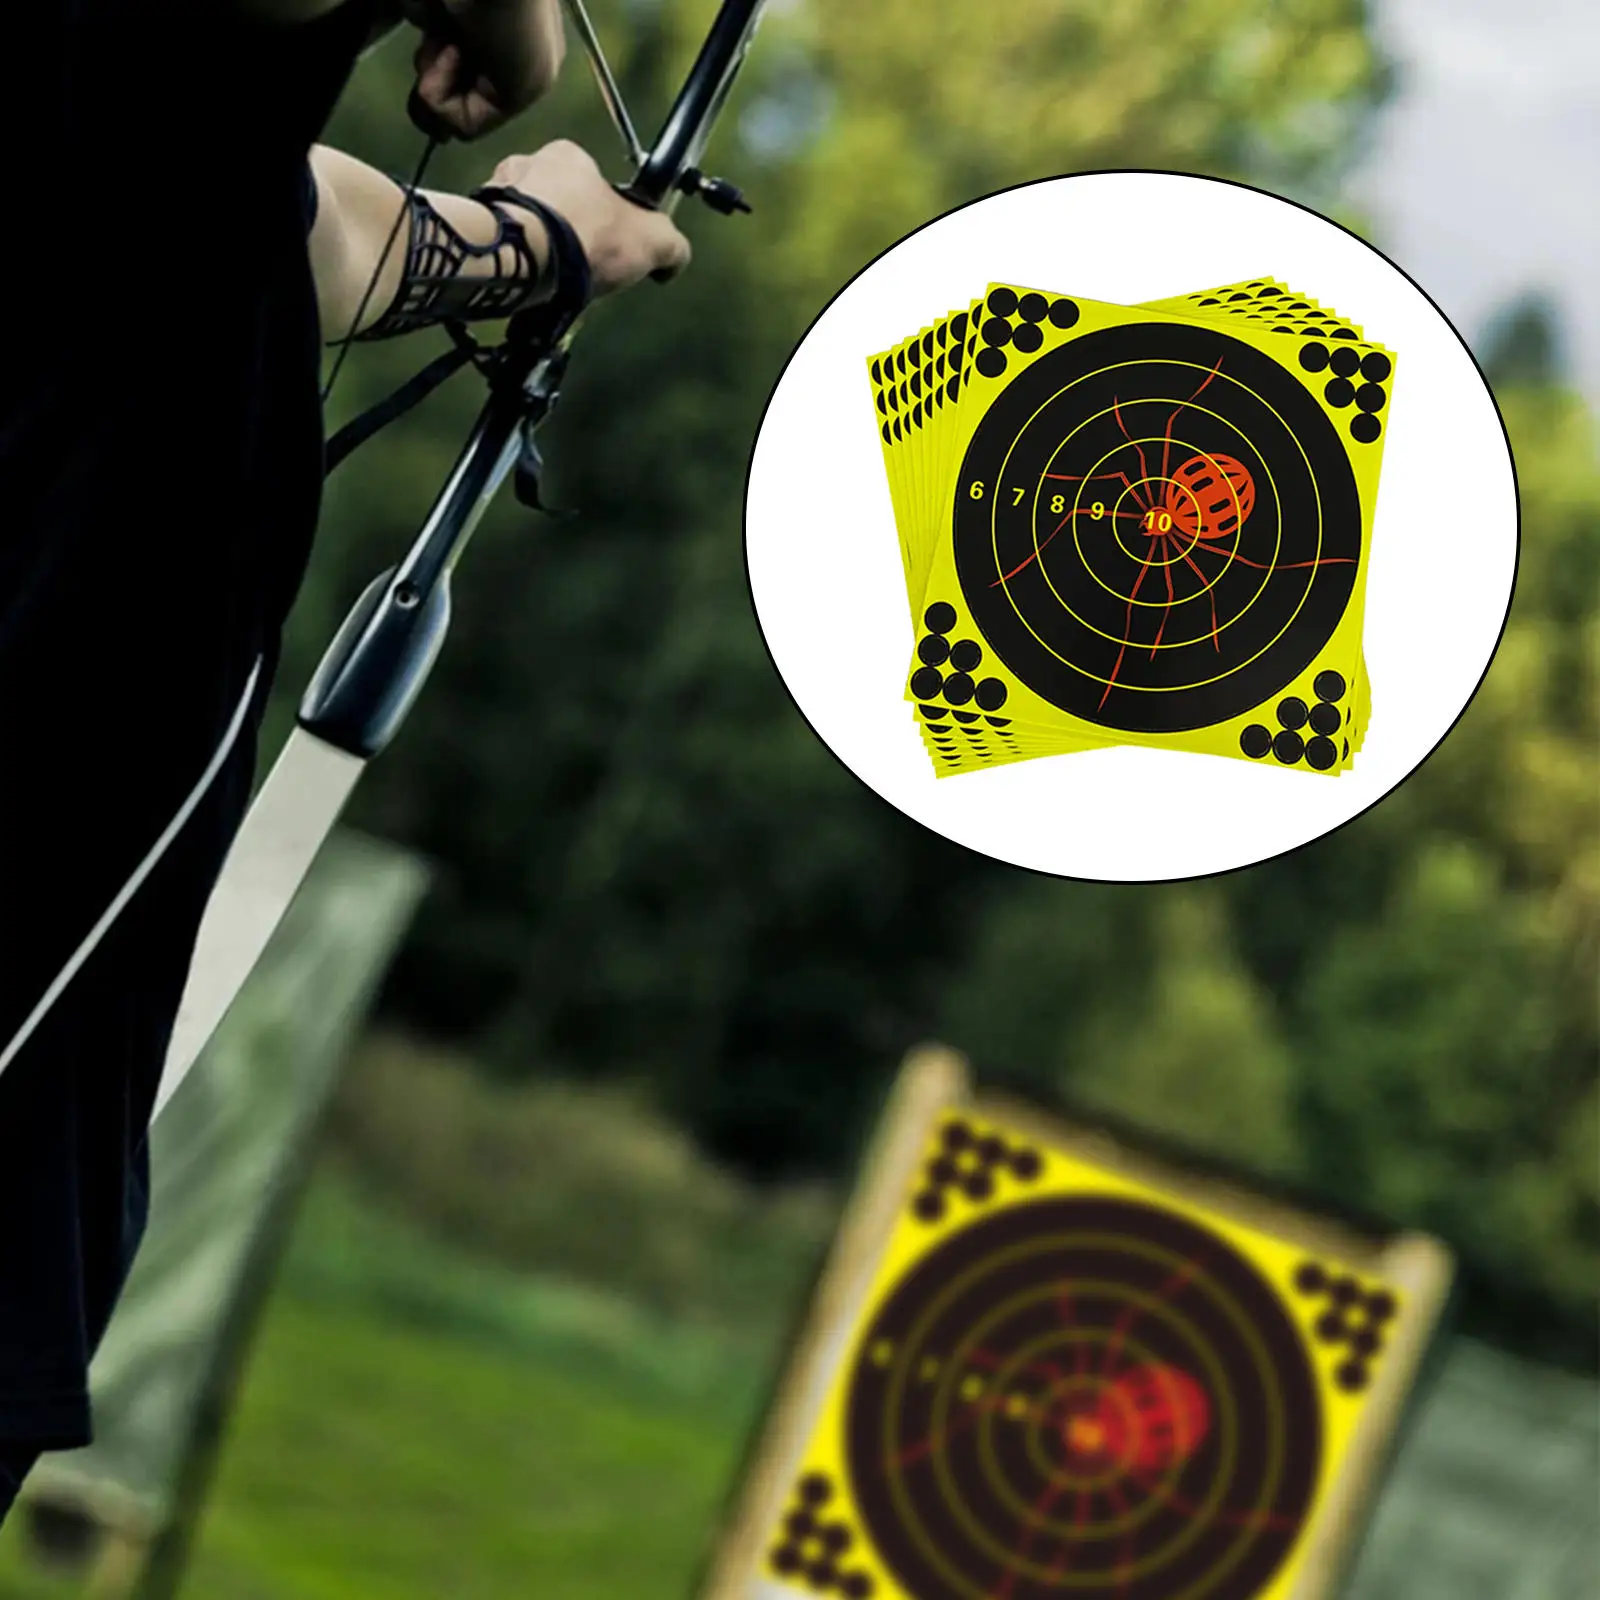 10 Pieces Archery Target Face Adhesive Reactivity Shot Target Face Stickers Archery Accessories 8 inch for Hunting Practice